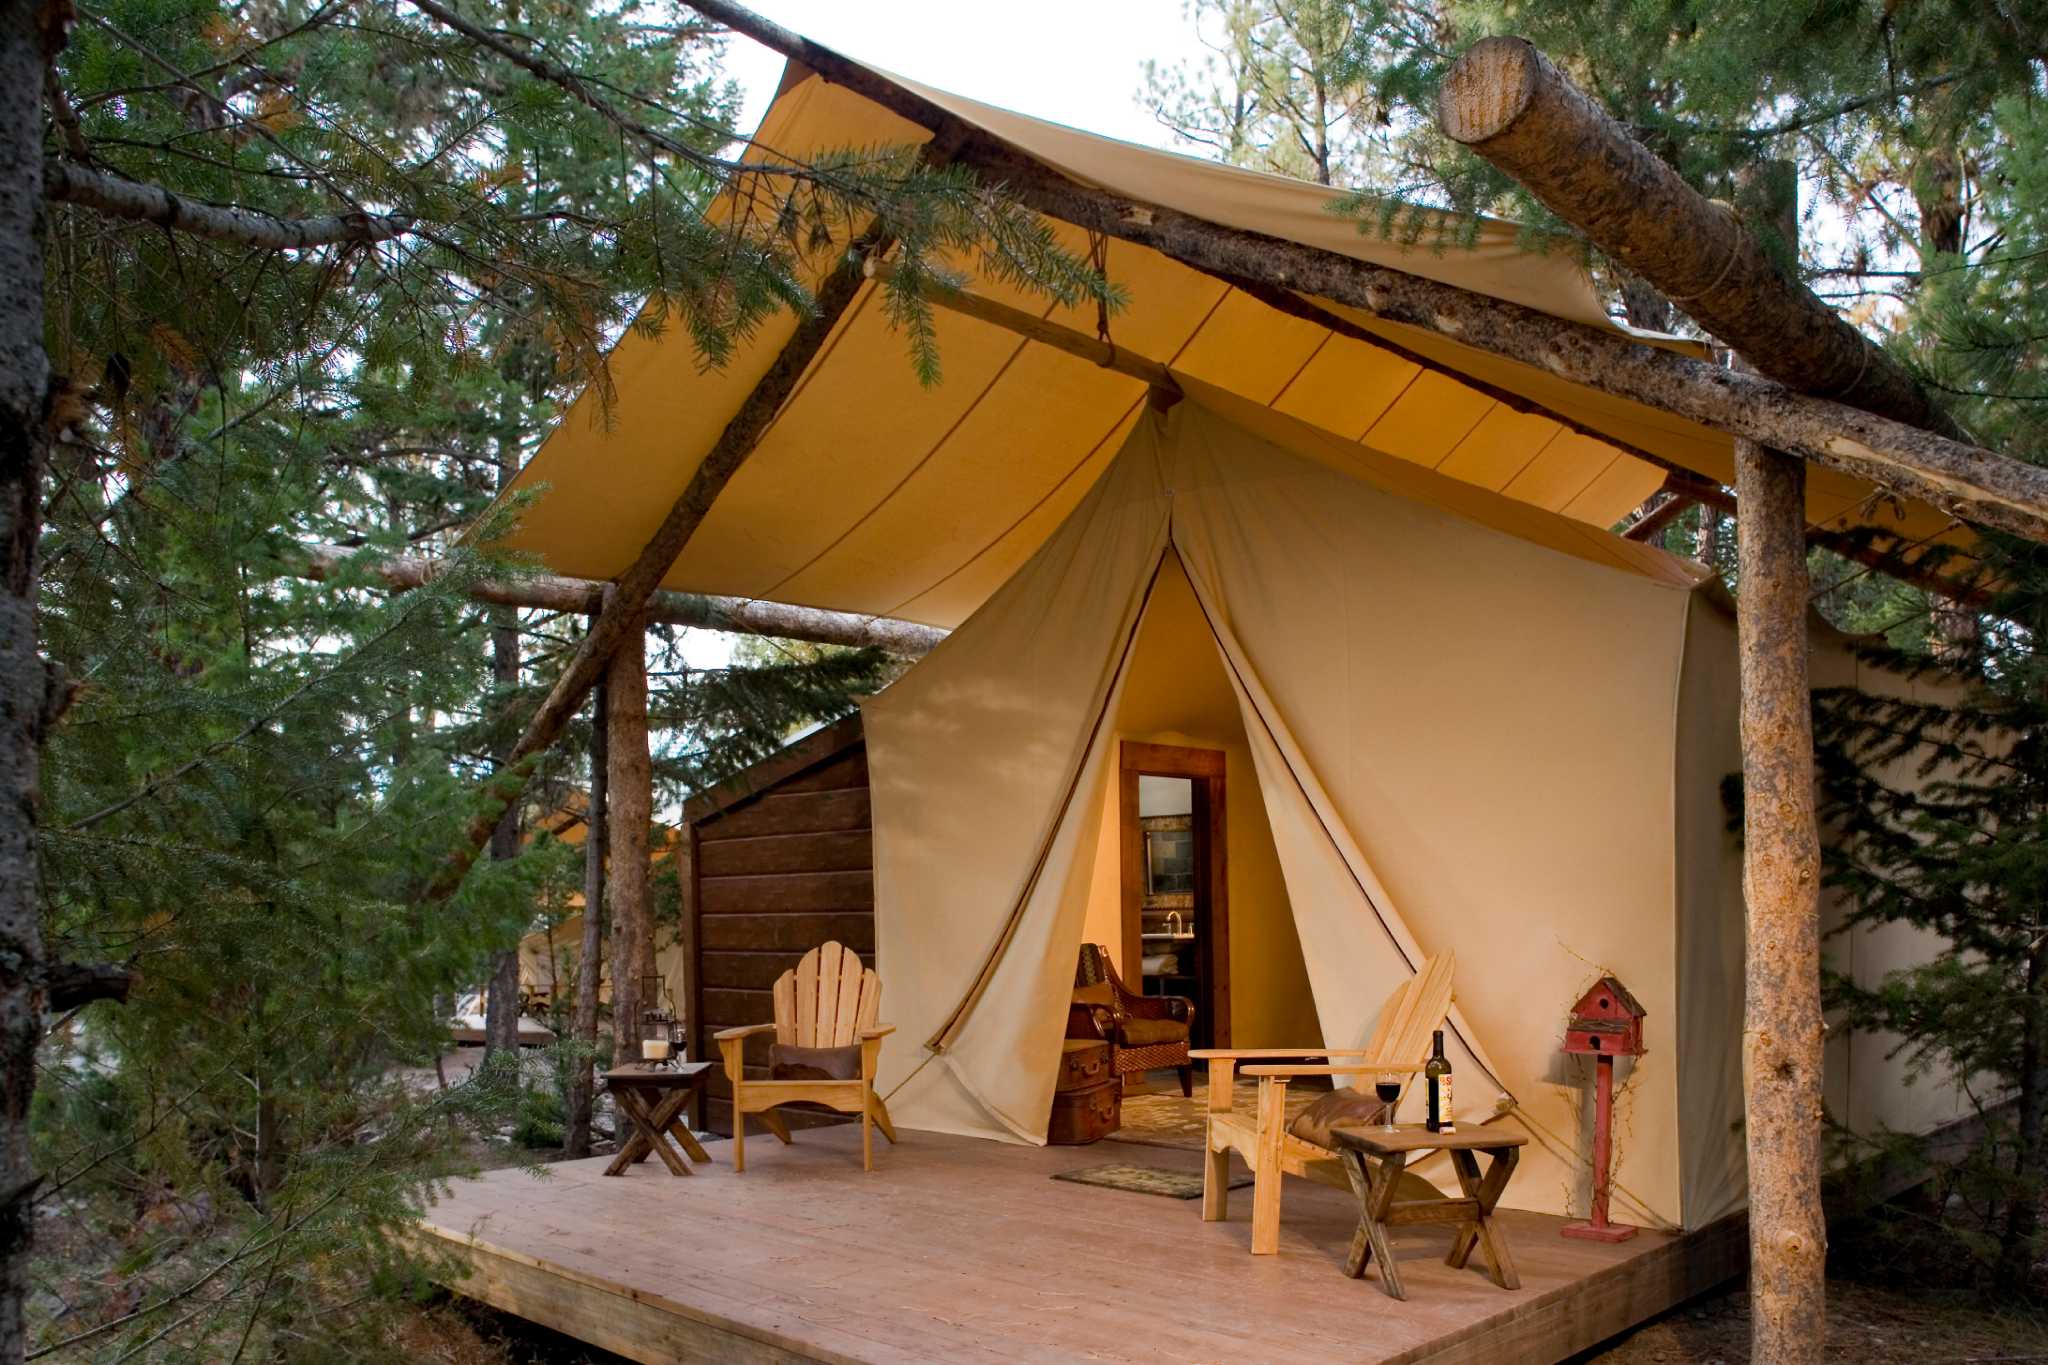 Family travel: 5 places to go glamping around the U.S ...
